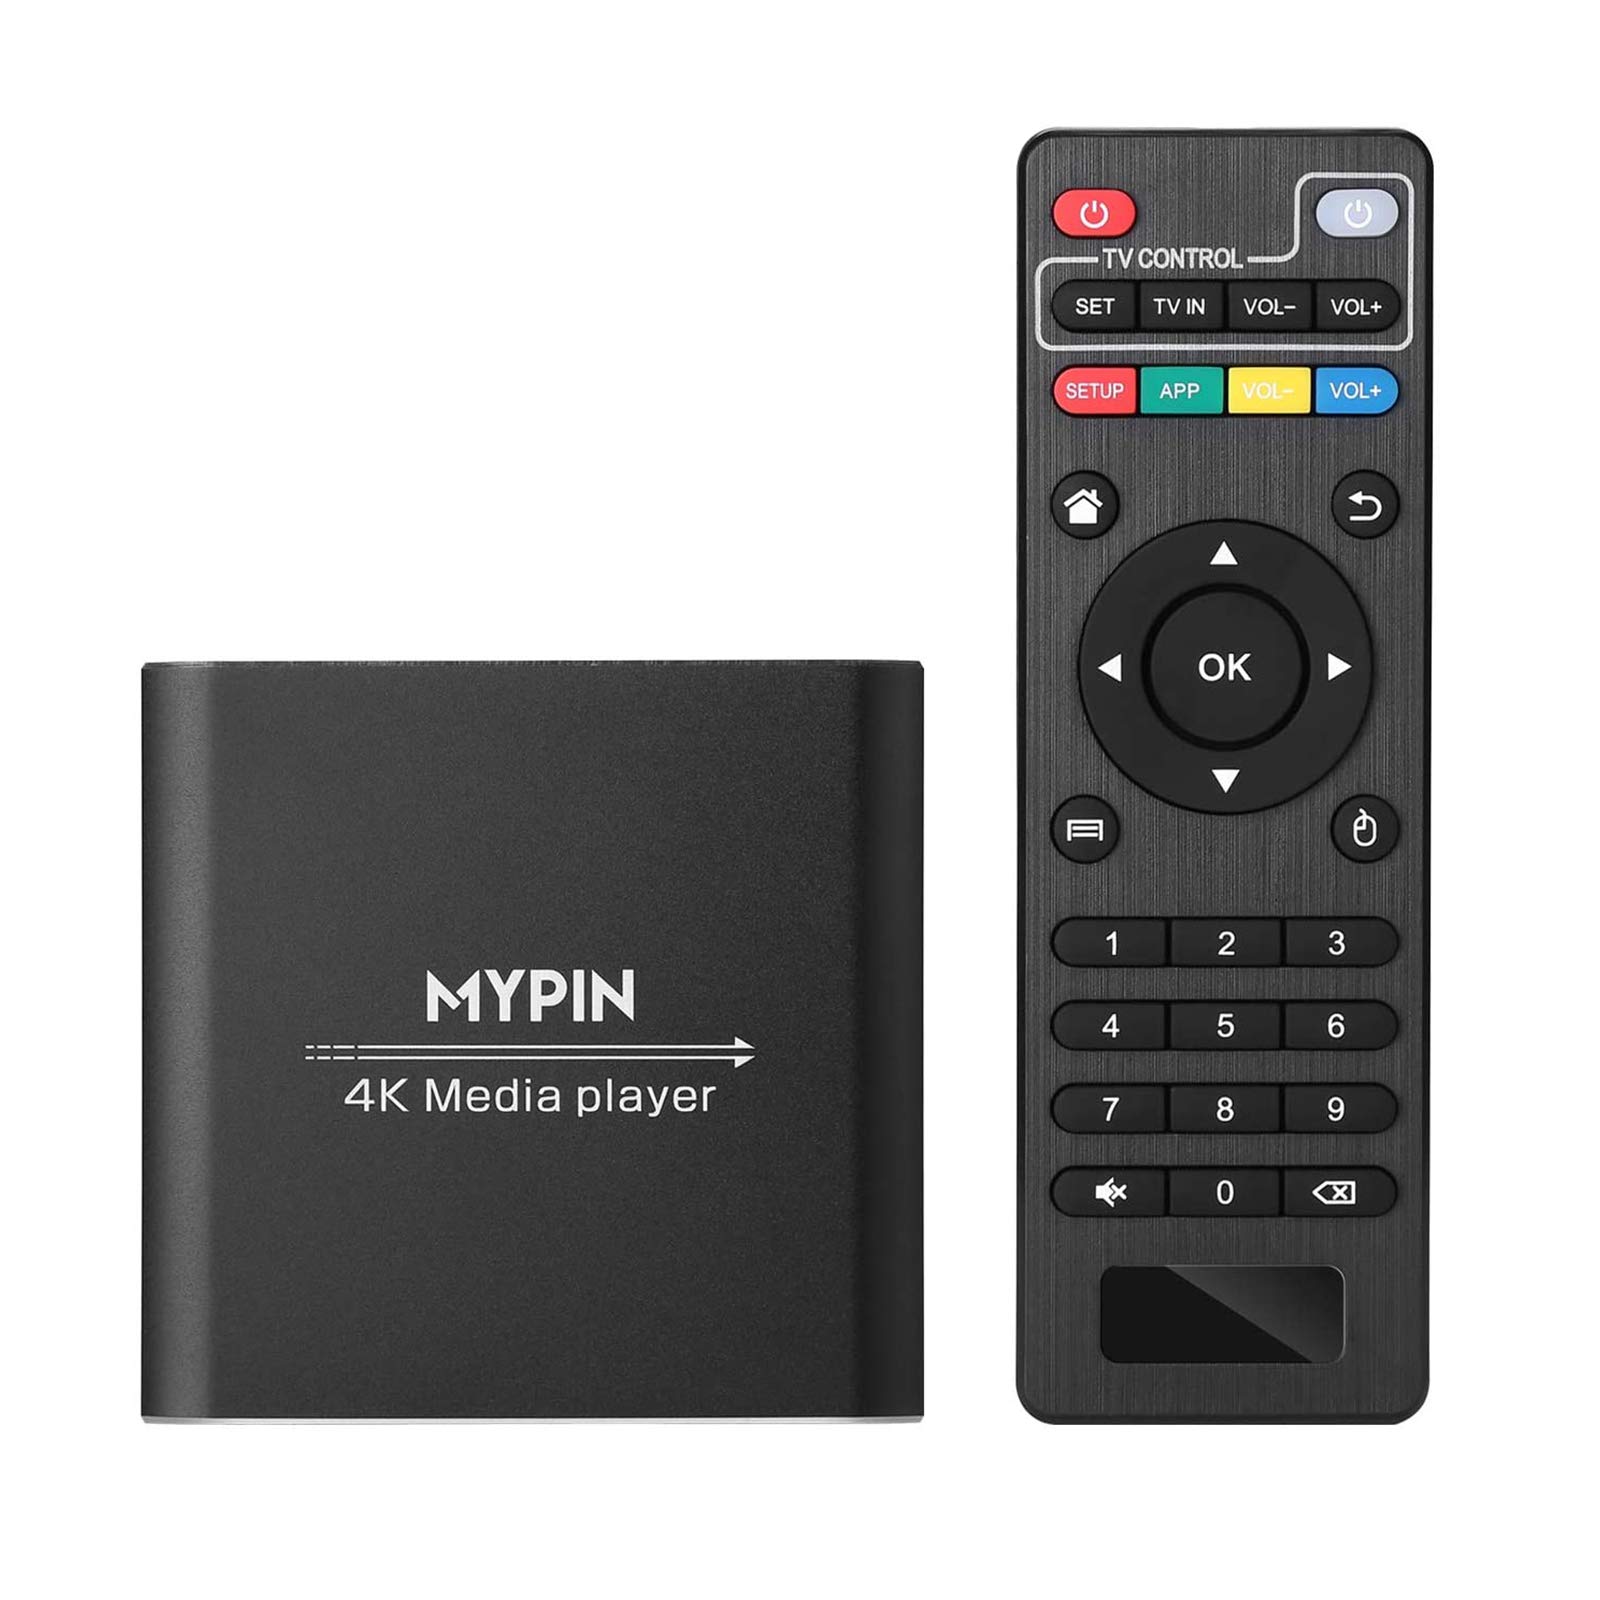 4K Media Player with ONE AV Cable, Digital MP4 Player for 8TB HDD/USB Drive/TF Card/H.265 MP4 PPT MKV AVI Support HDMI/AV/Optical Out and USB Mouse/Keyboard-HDMI up to 7.1 Surround Sound (Black)